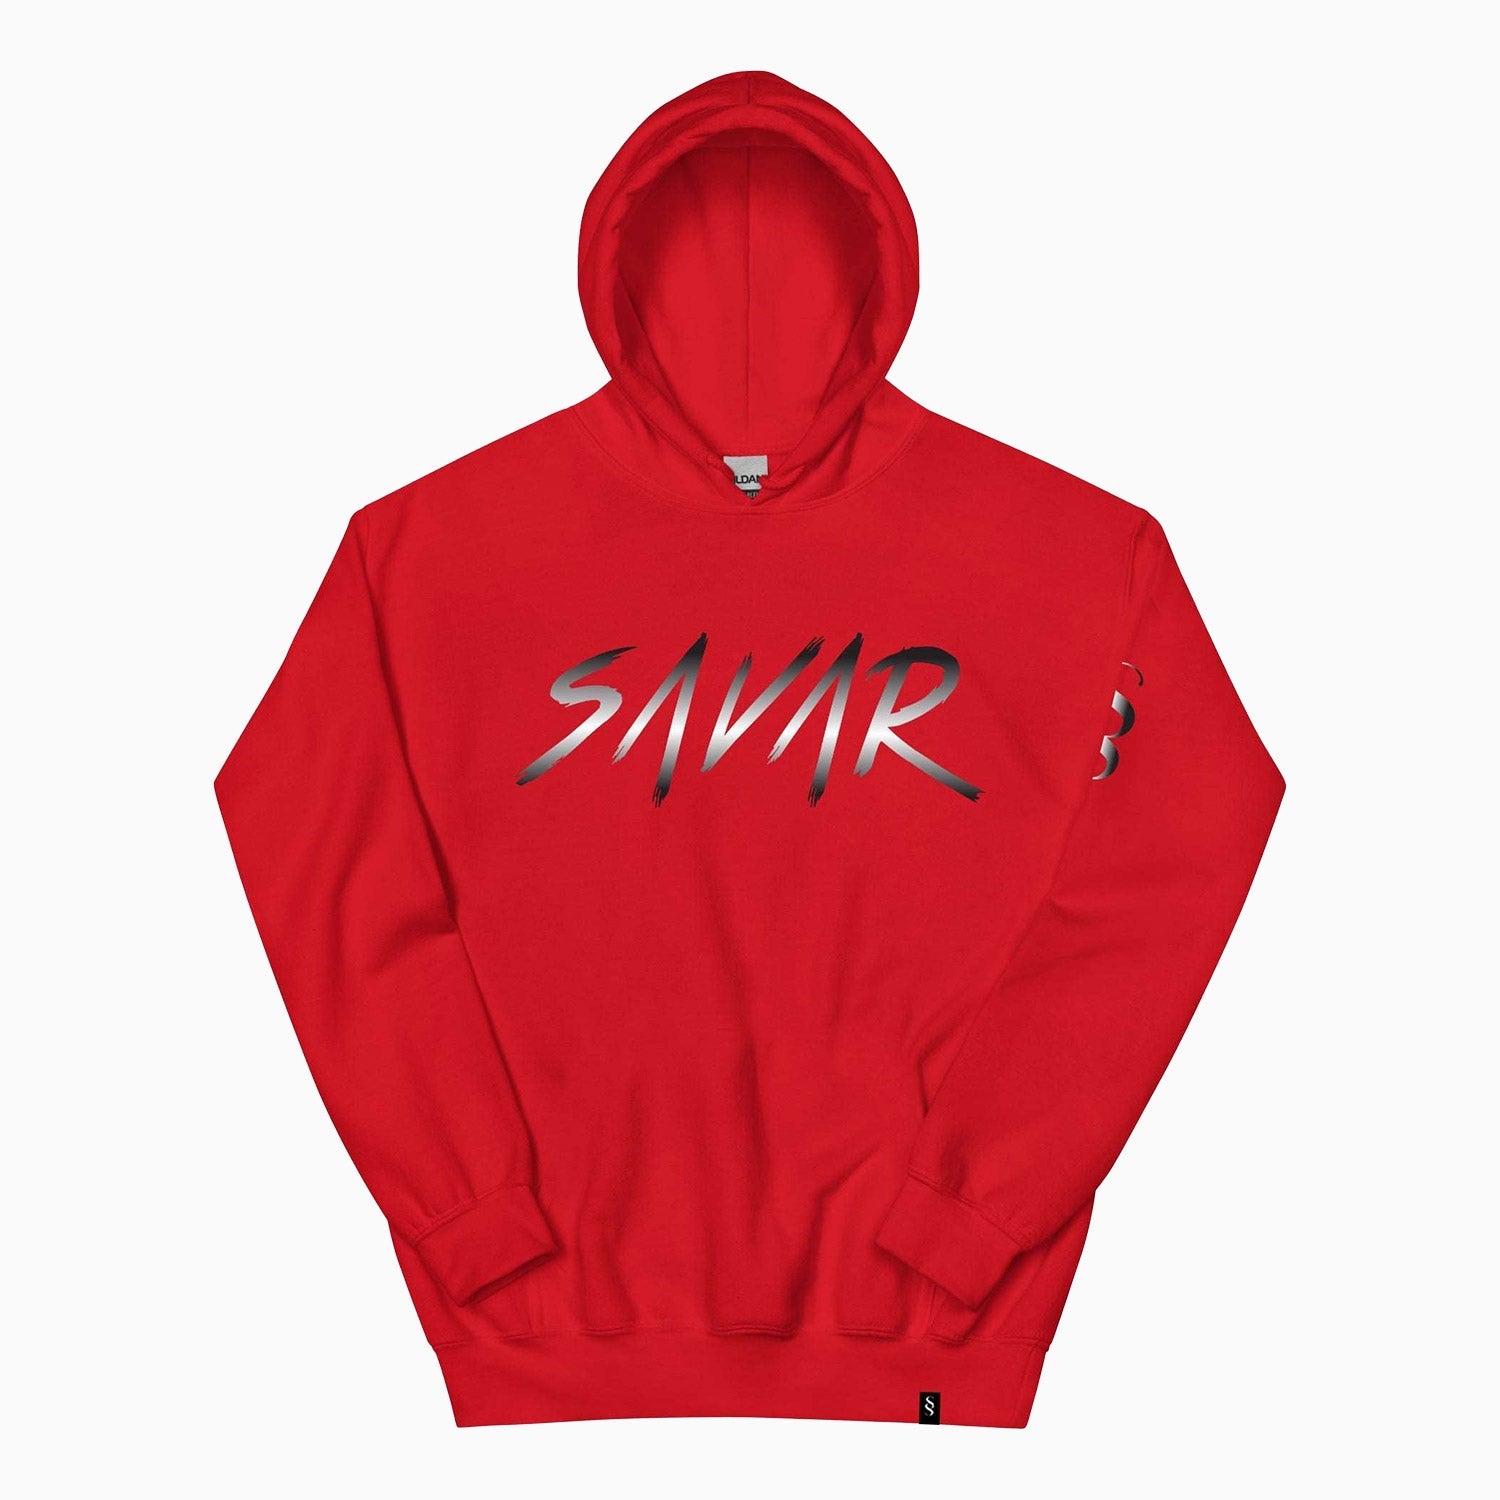 signature-design-printed-pull-over-red-hoodie-for-men-sh111-657